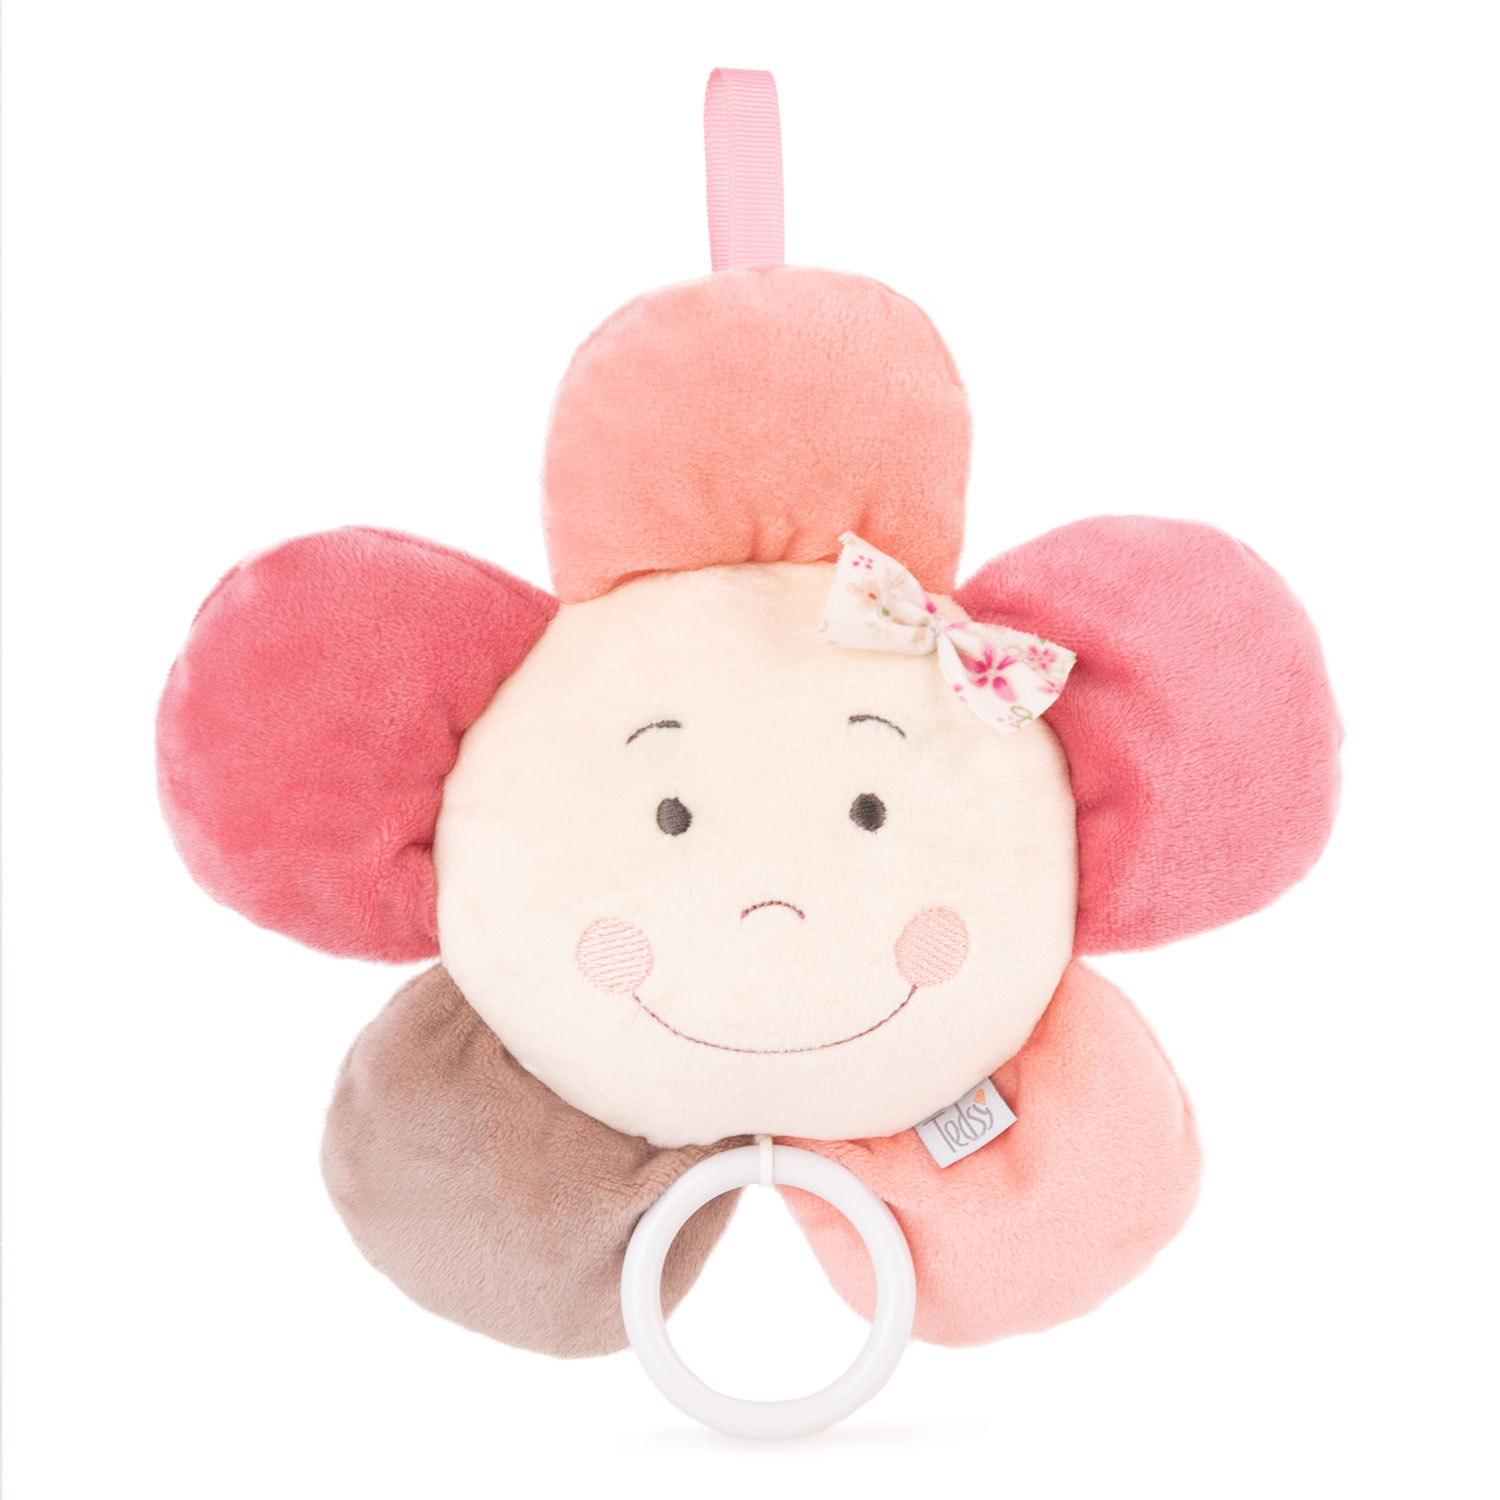 Baby musical toy Rosy